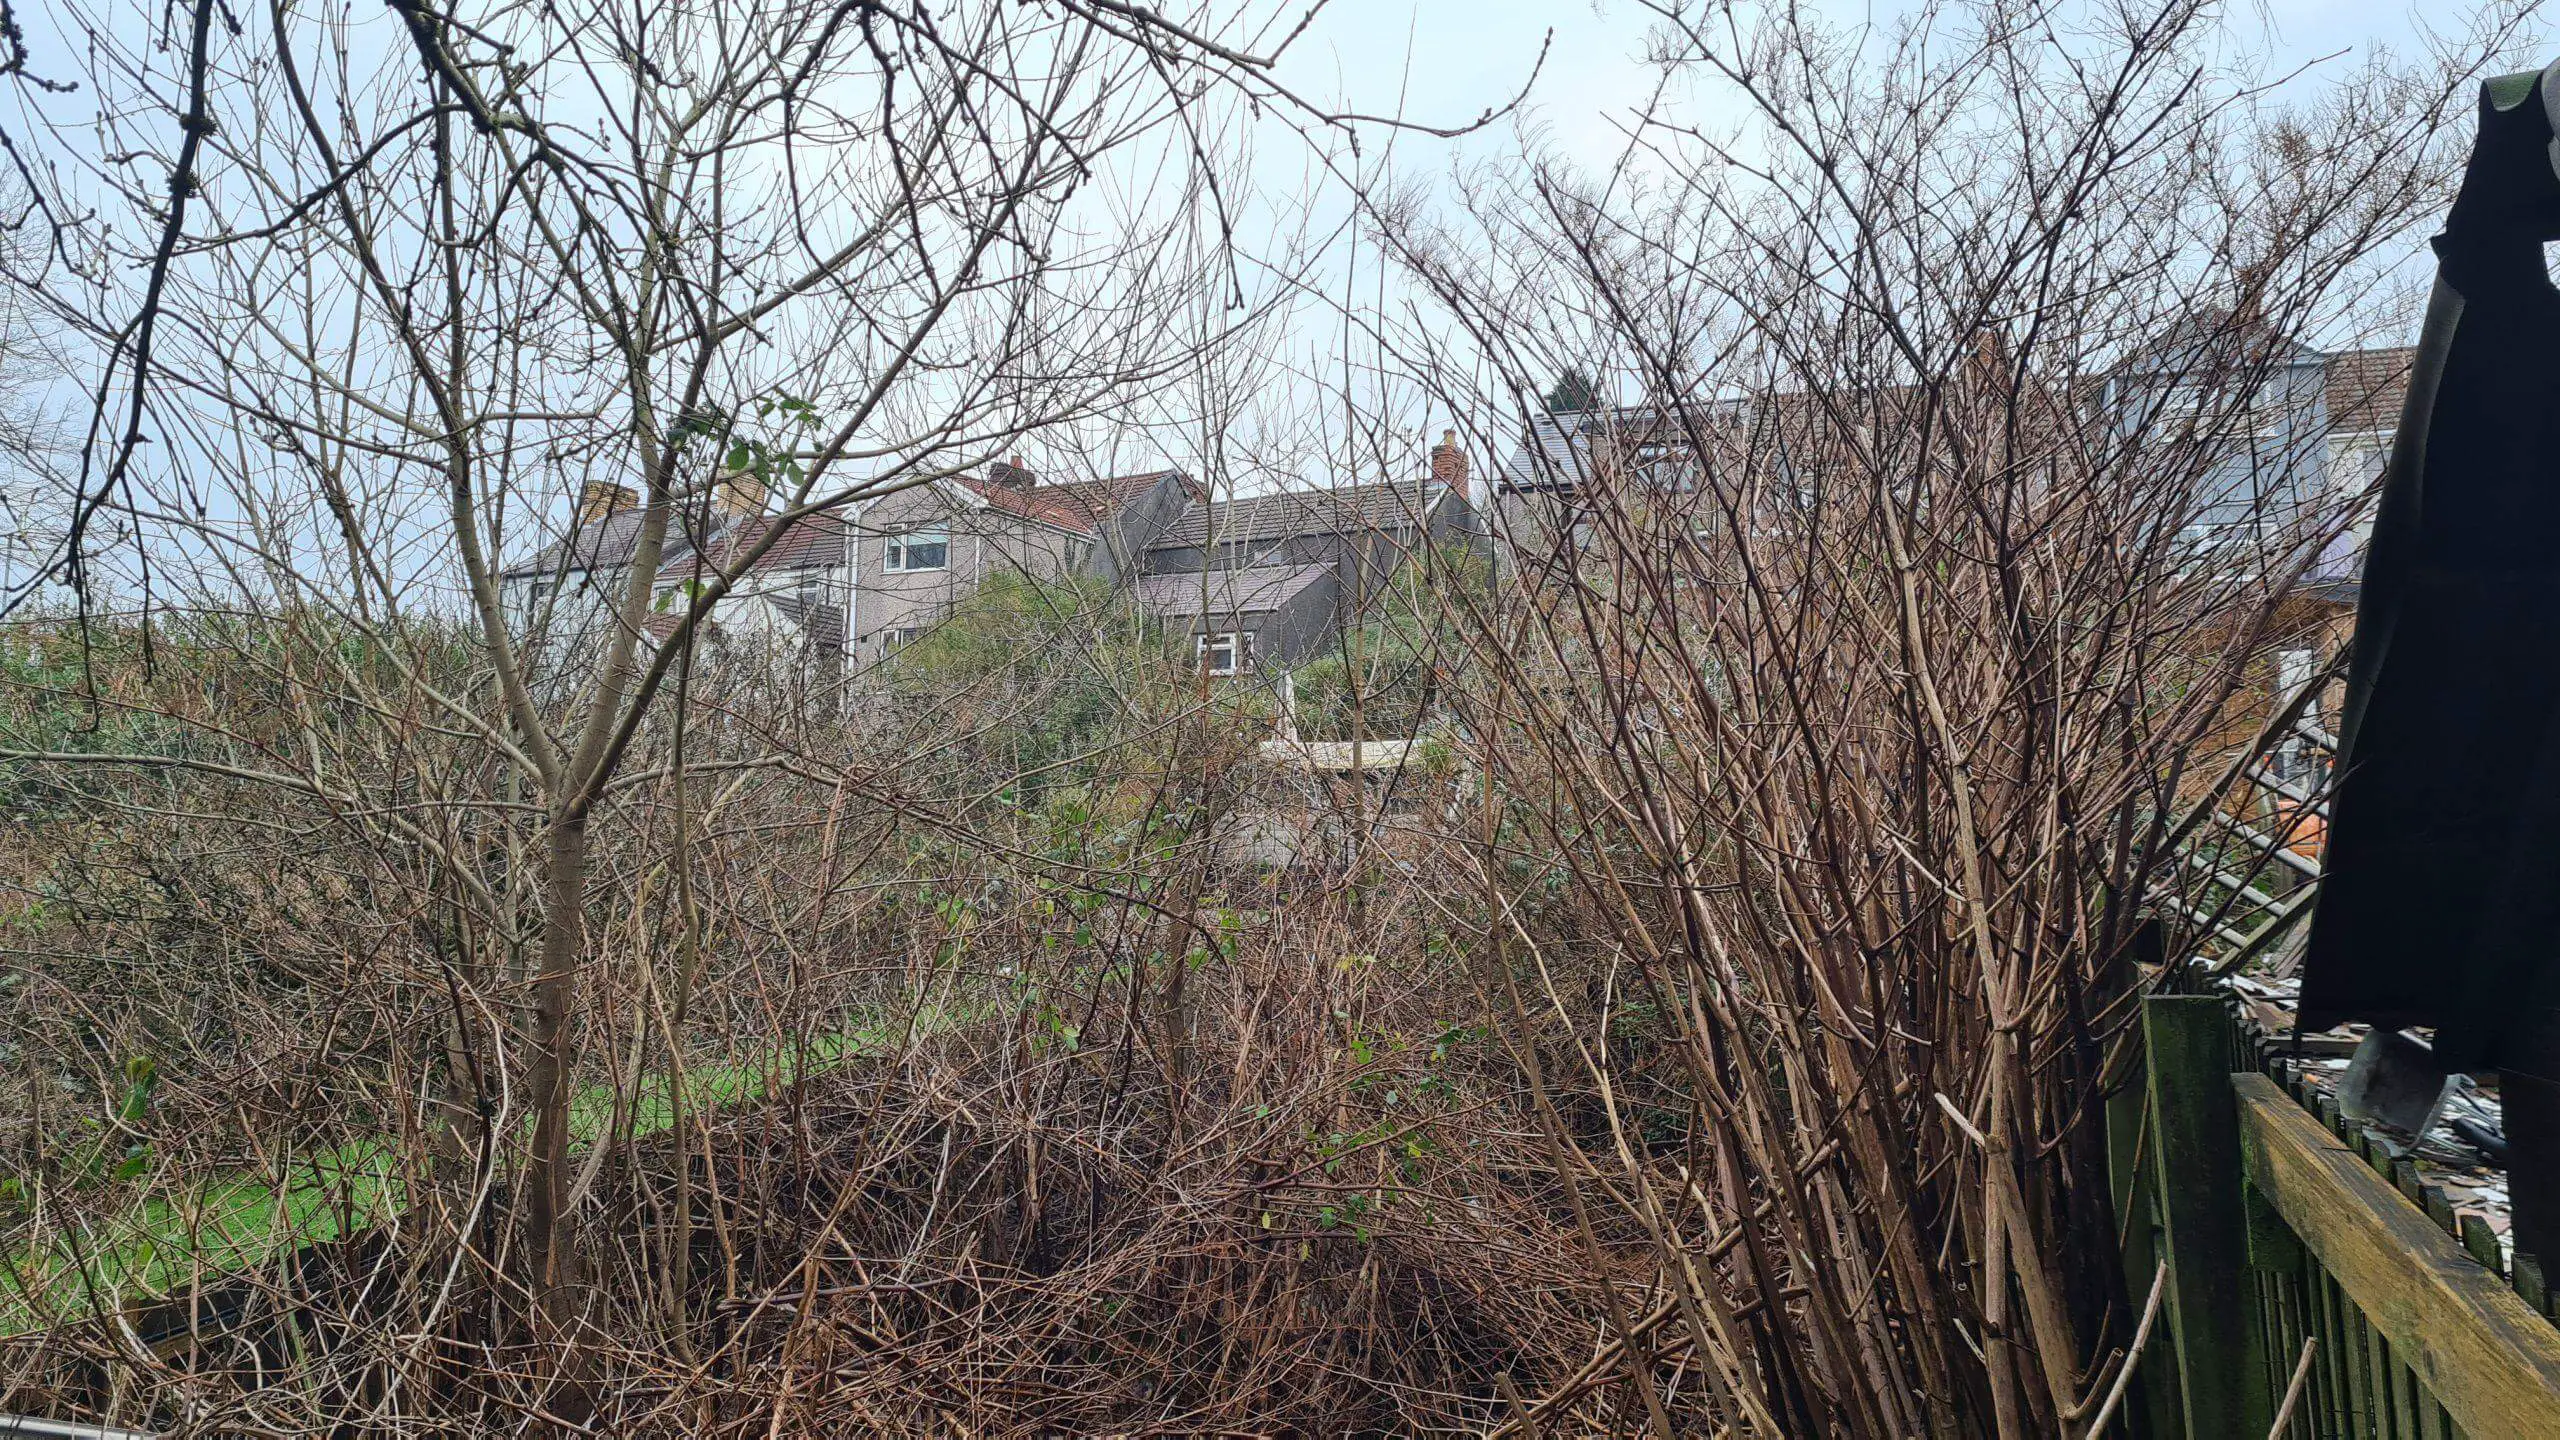 Identifying Japanese knotweed stems to clear from a site and therefore improve the local ecosystem is the first step